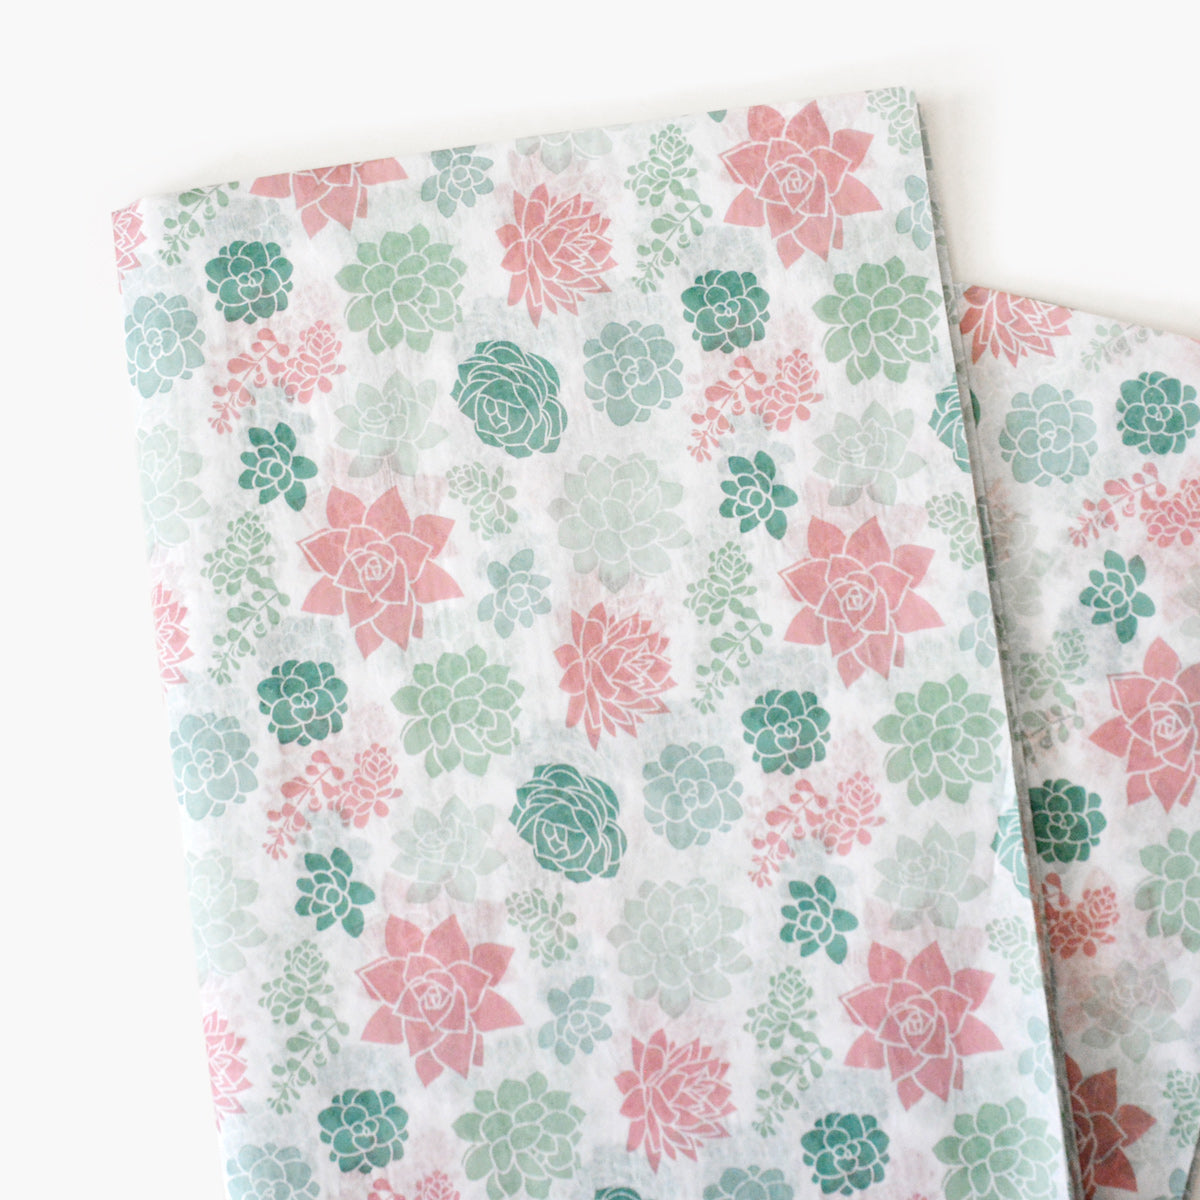 Pink and Green Succulents Patterned Tissue Paper - Boho Plants Christmas  Holiday Gift Wrapping - Bridal Shower Gift Wrap - GenWooShop